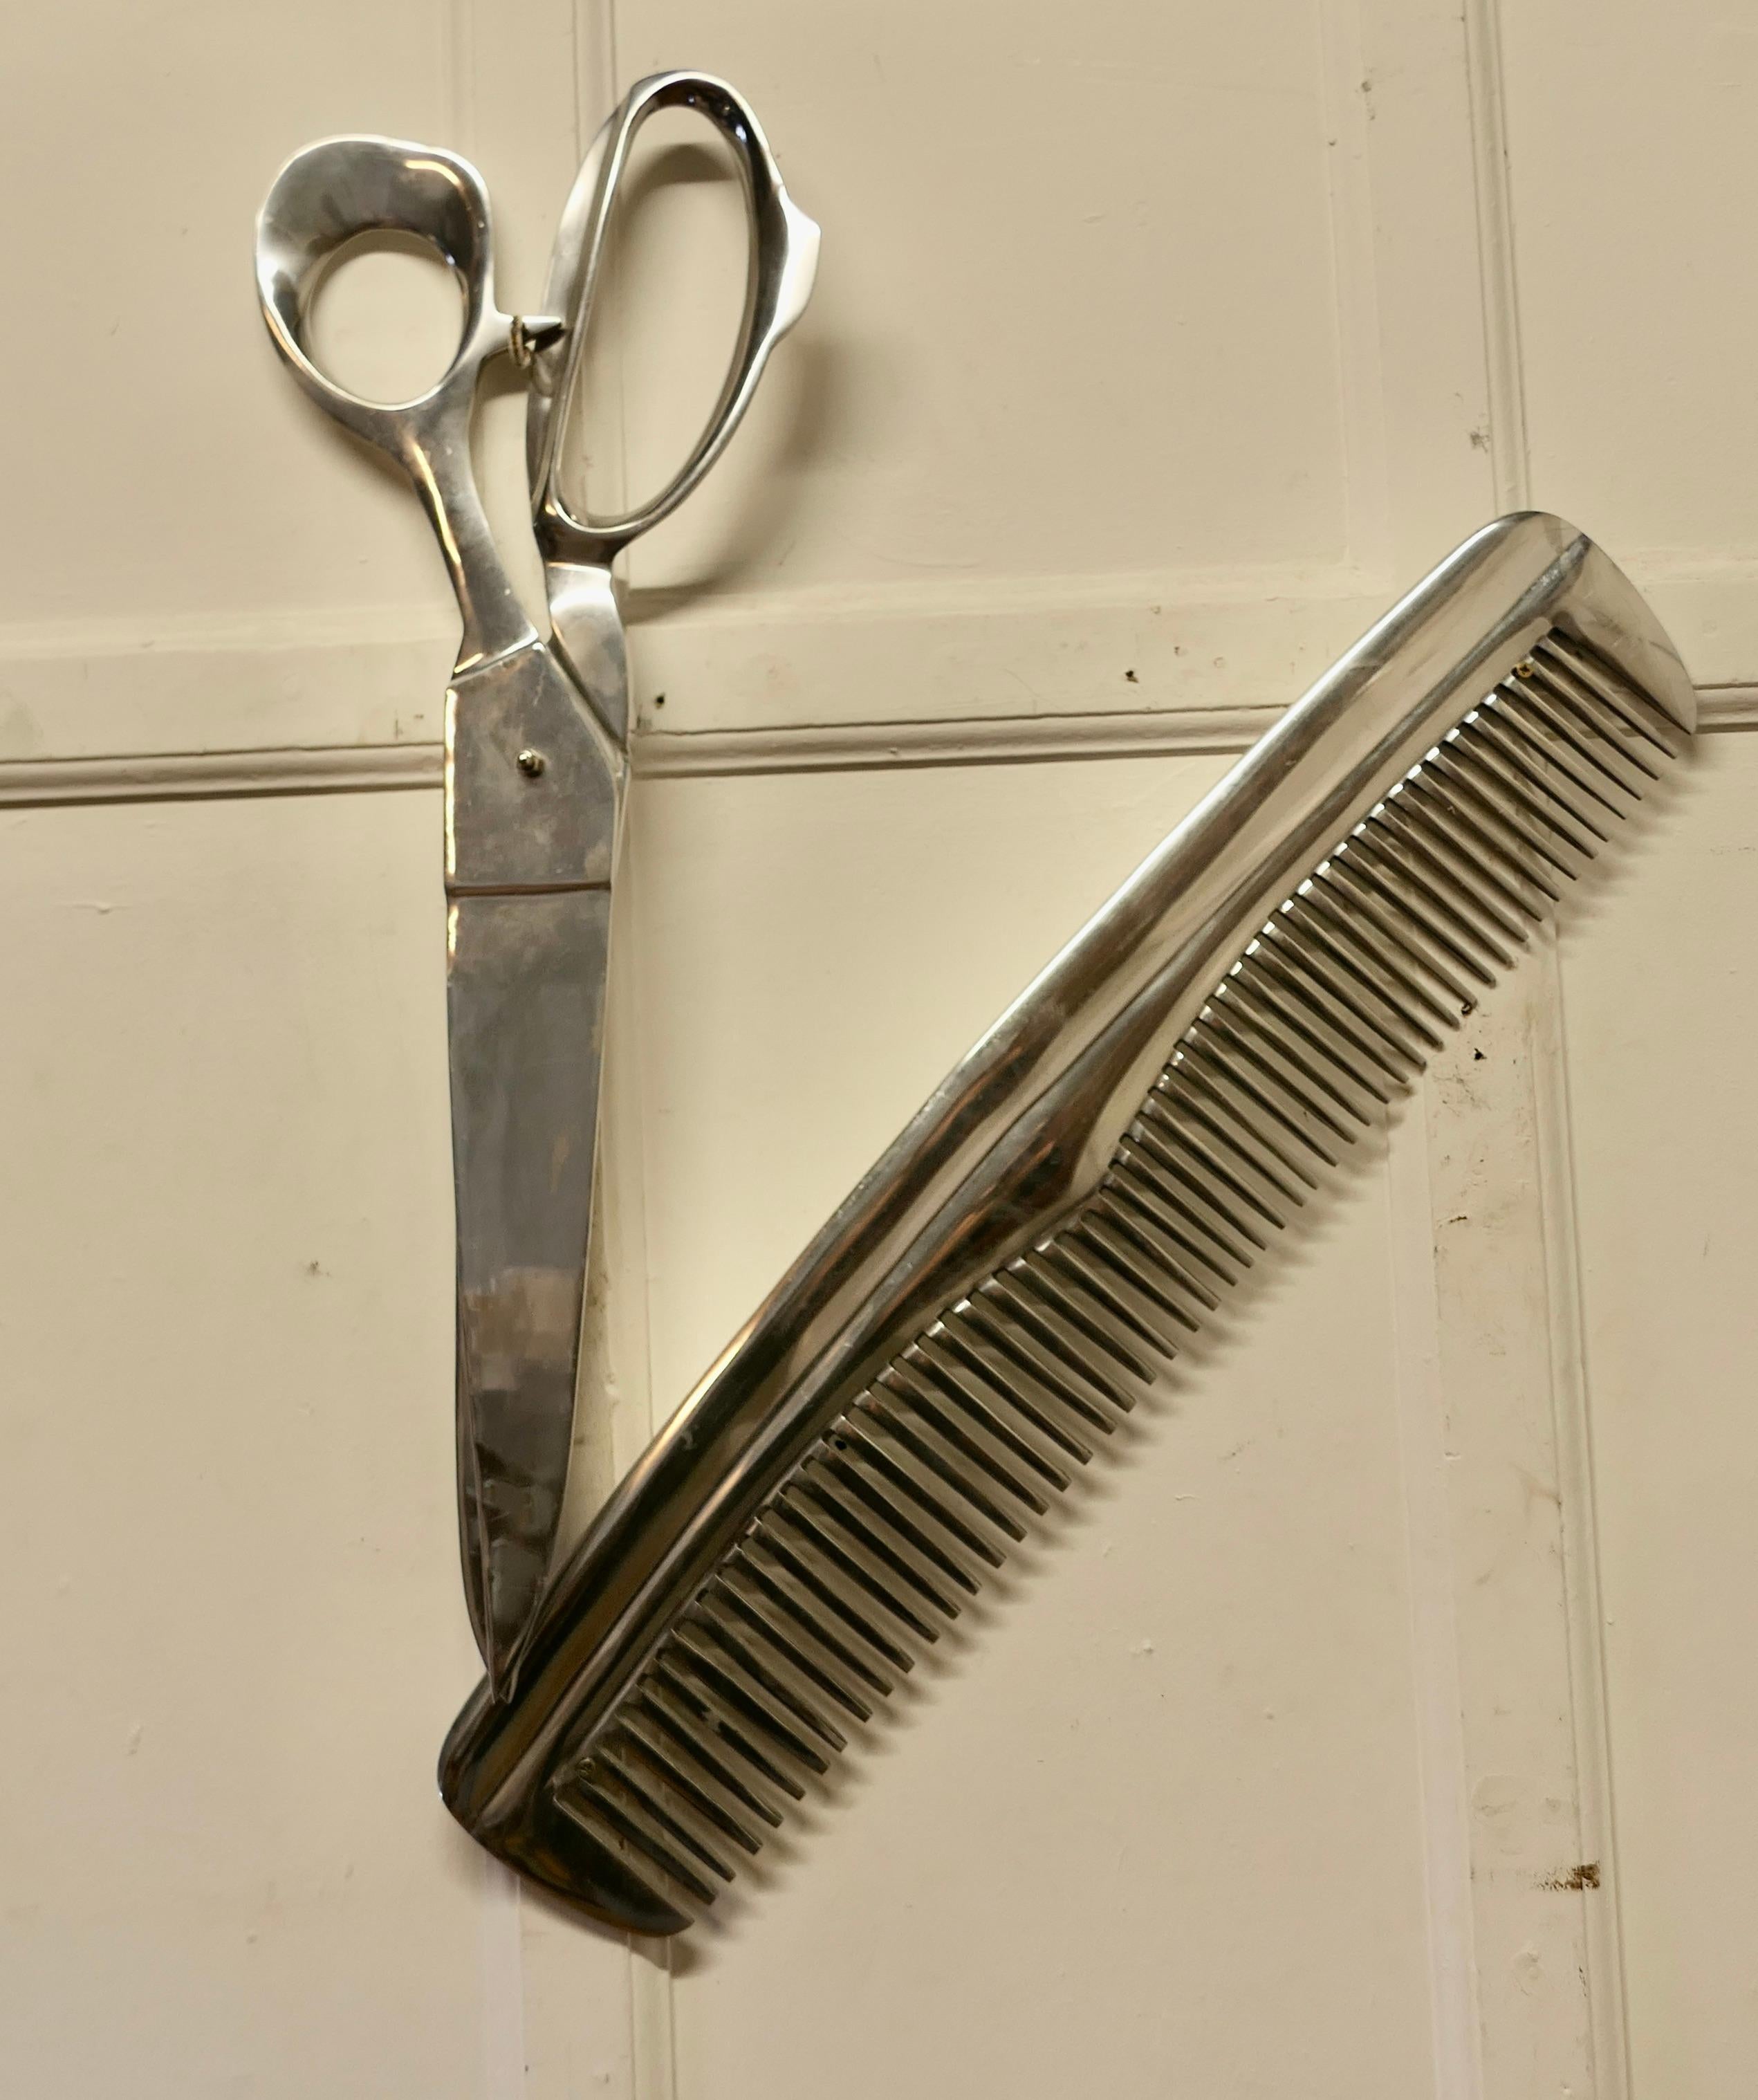 Barber Shop Trade Sign, Giant Comb and Scissors   Larger than life  For Sale 1